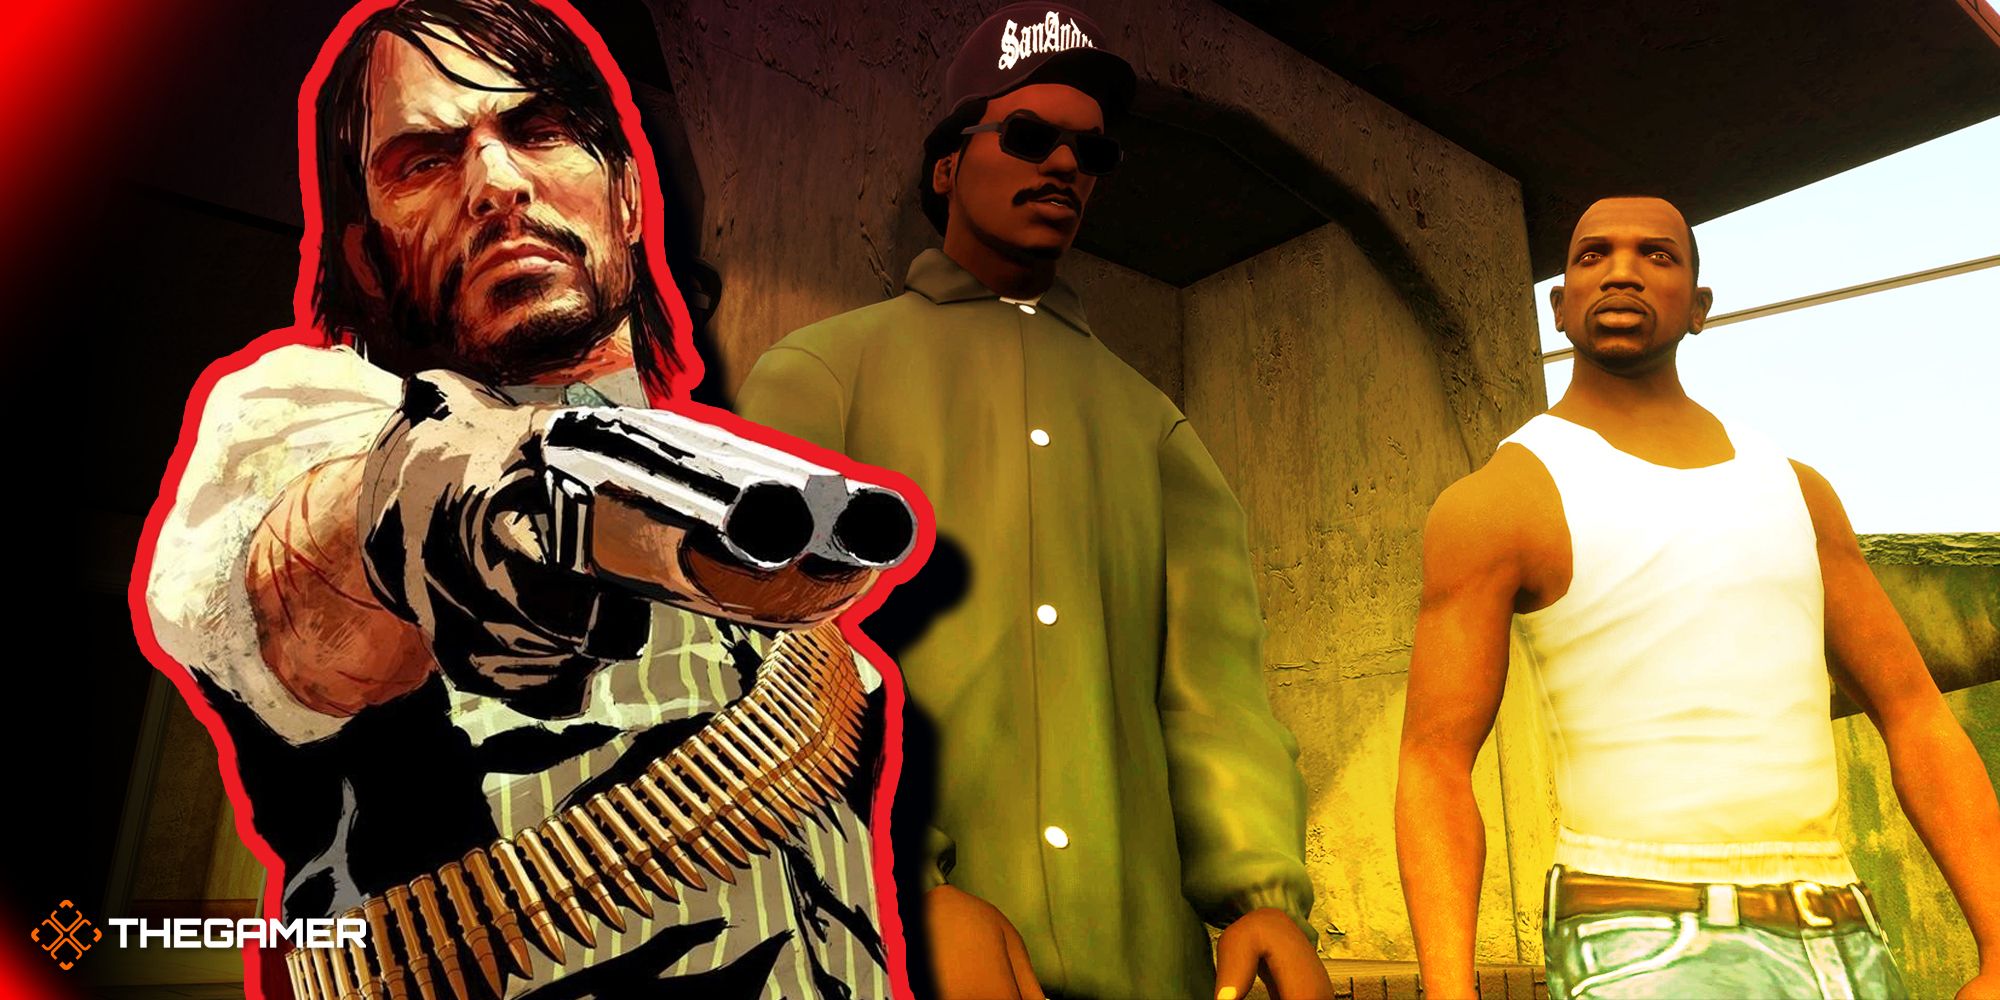 John Marston from Red Dead Redemption and characters from Grand Theft Auto: San Andreas